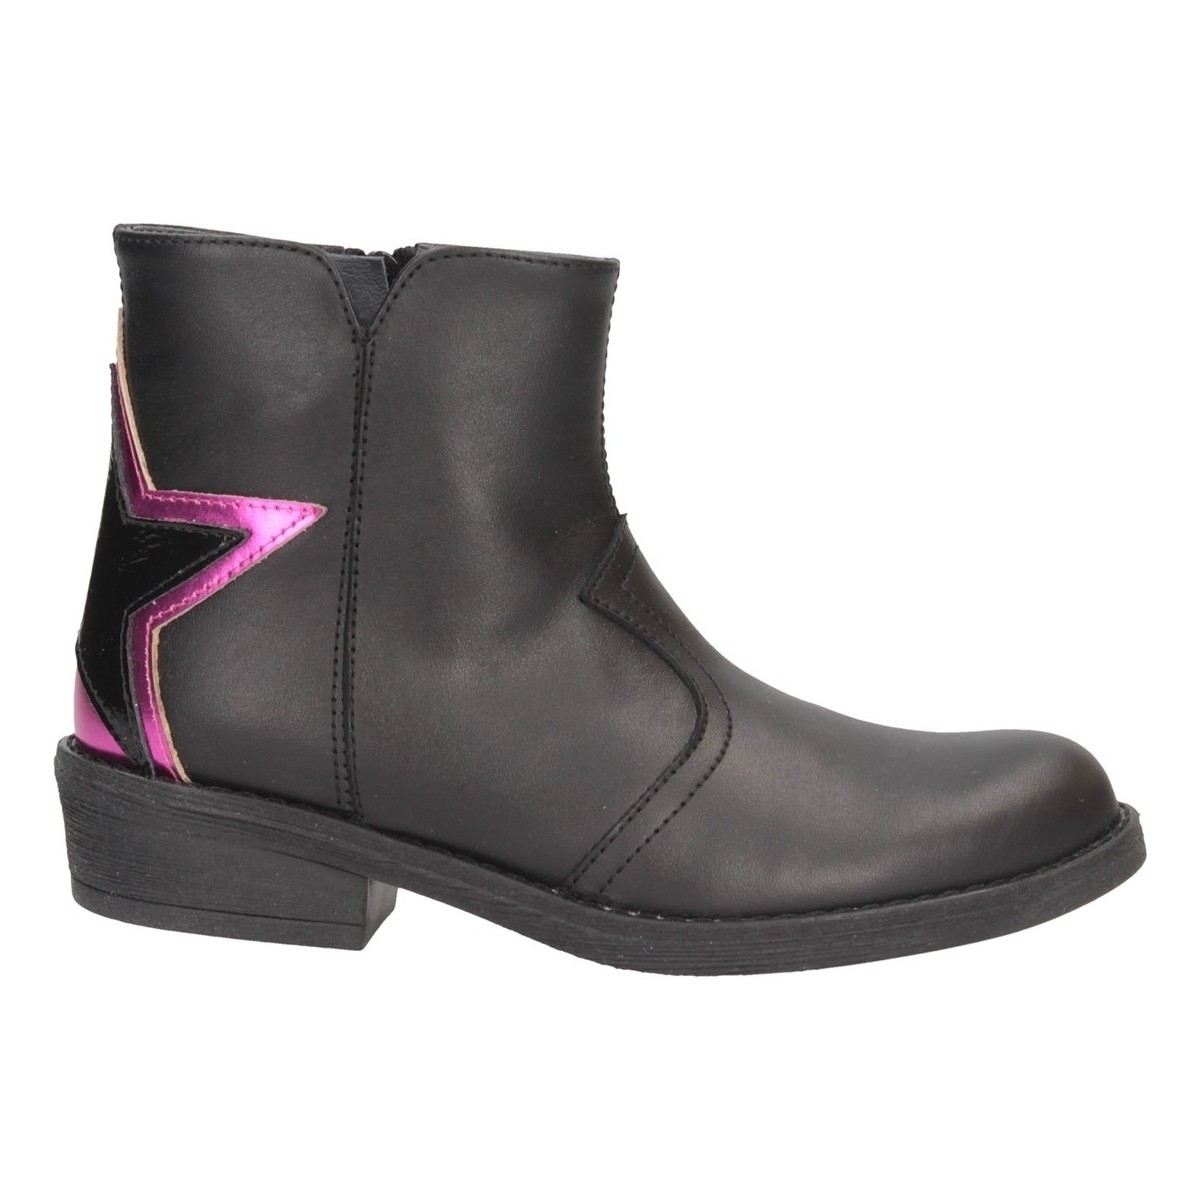 Chaussures Fille Bottes ville Dianetti Made In Italy I9889 Texano Enfant Noir / Fuchsia Multicolore